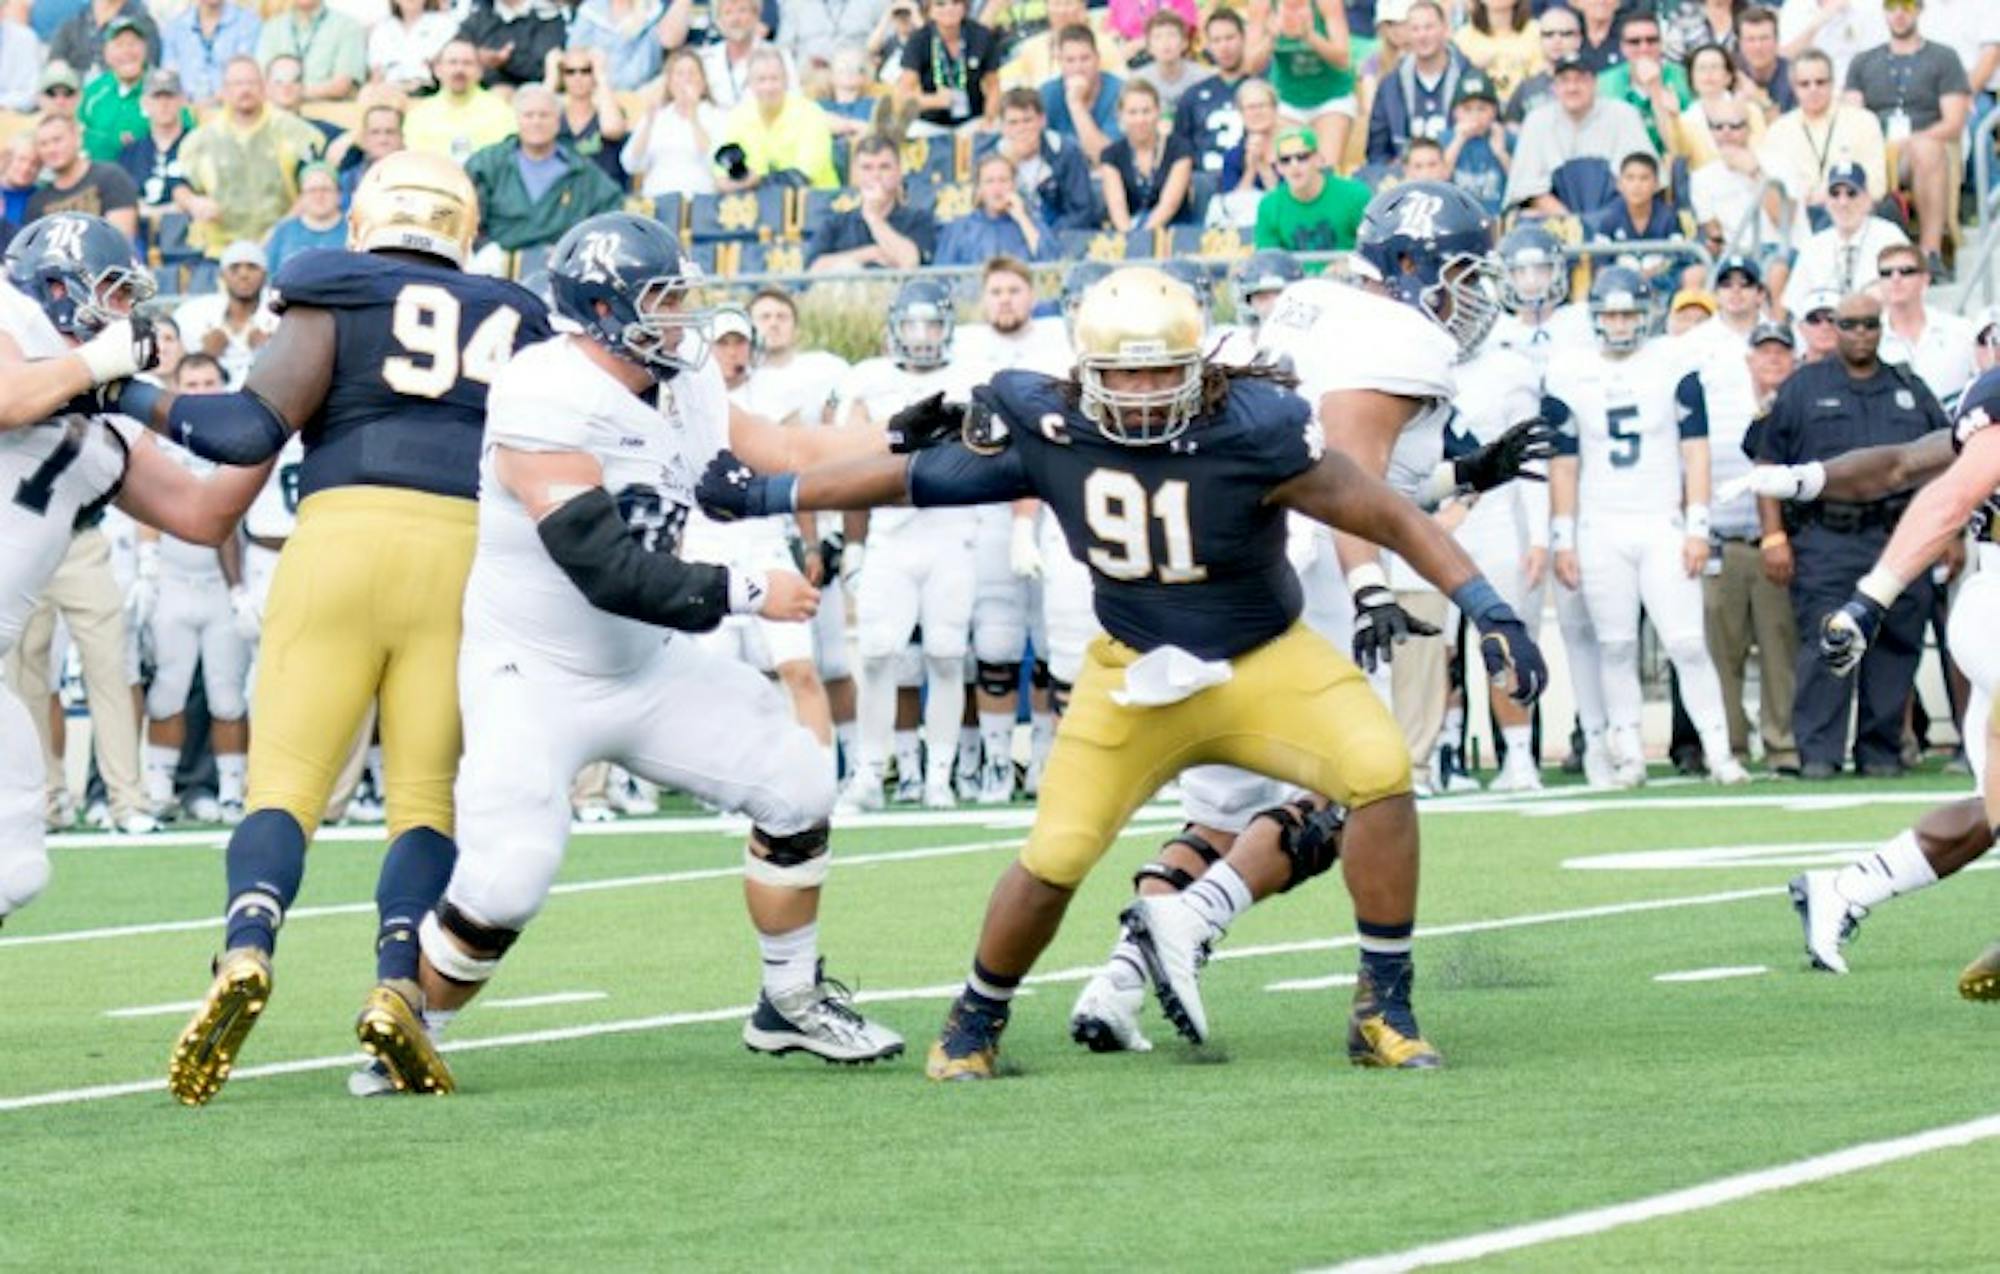 Irish senior defensive end and captain Sheldon Day works past his blocker in an attempt to get to the ball carrier during Notre Dame’s 48-17 victory over Rice.